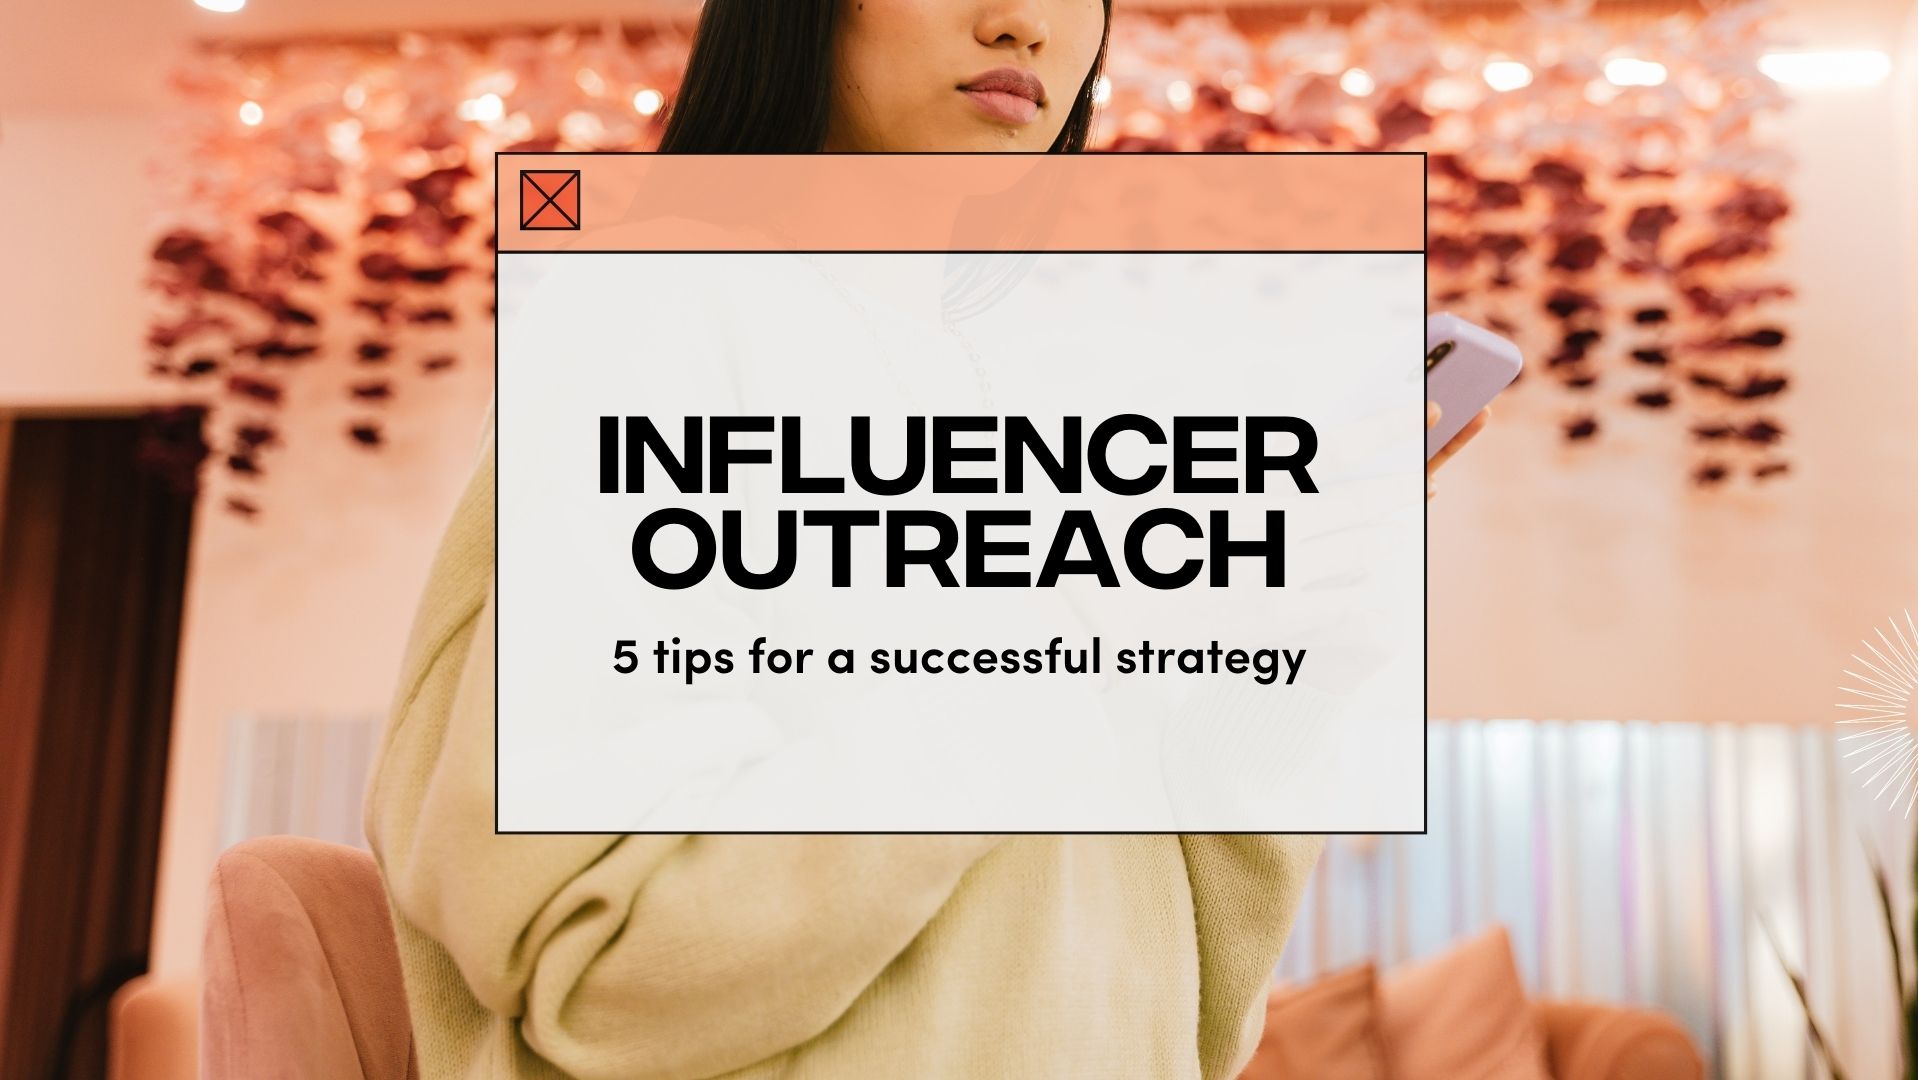 Fanbytes | Influencer outreach - Tips for a successful strategy